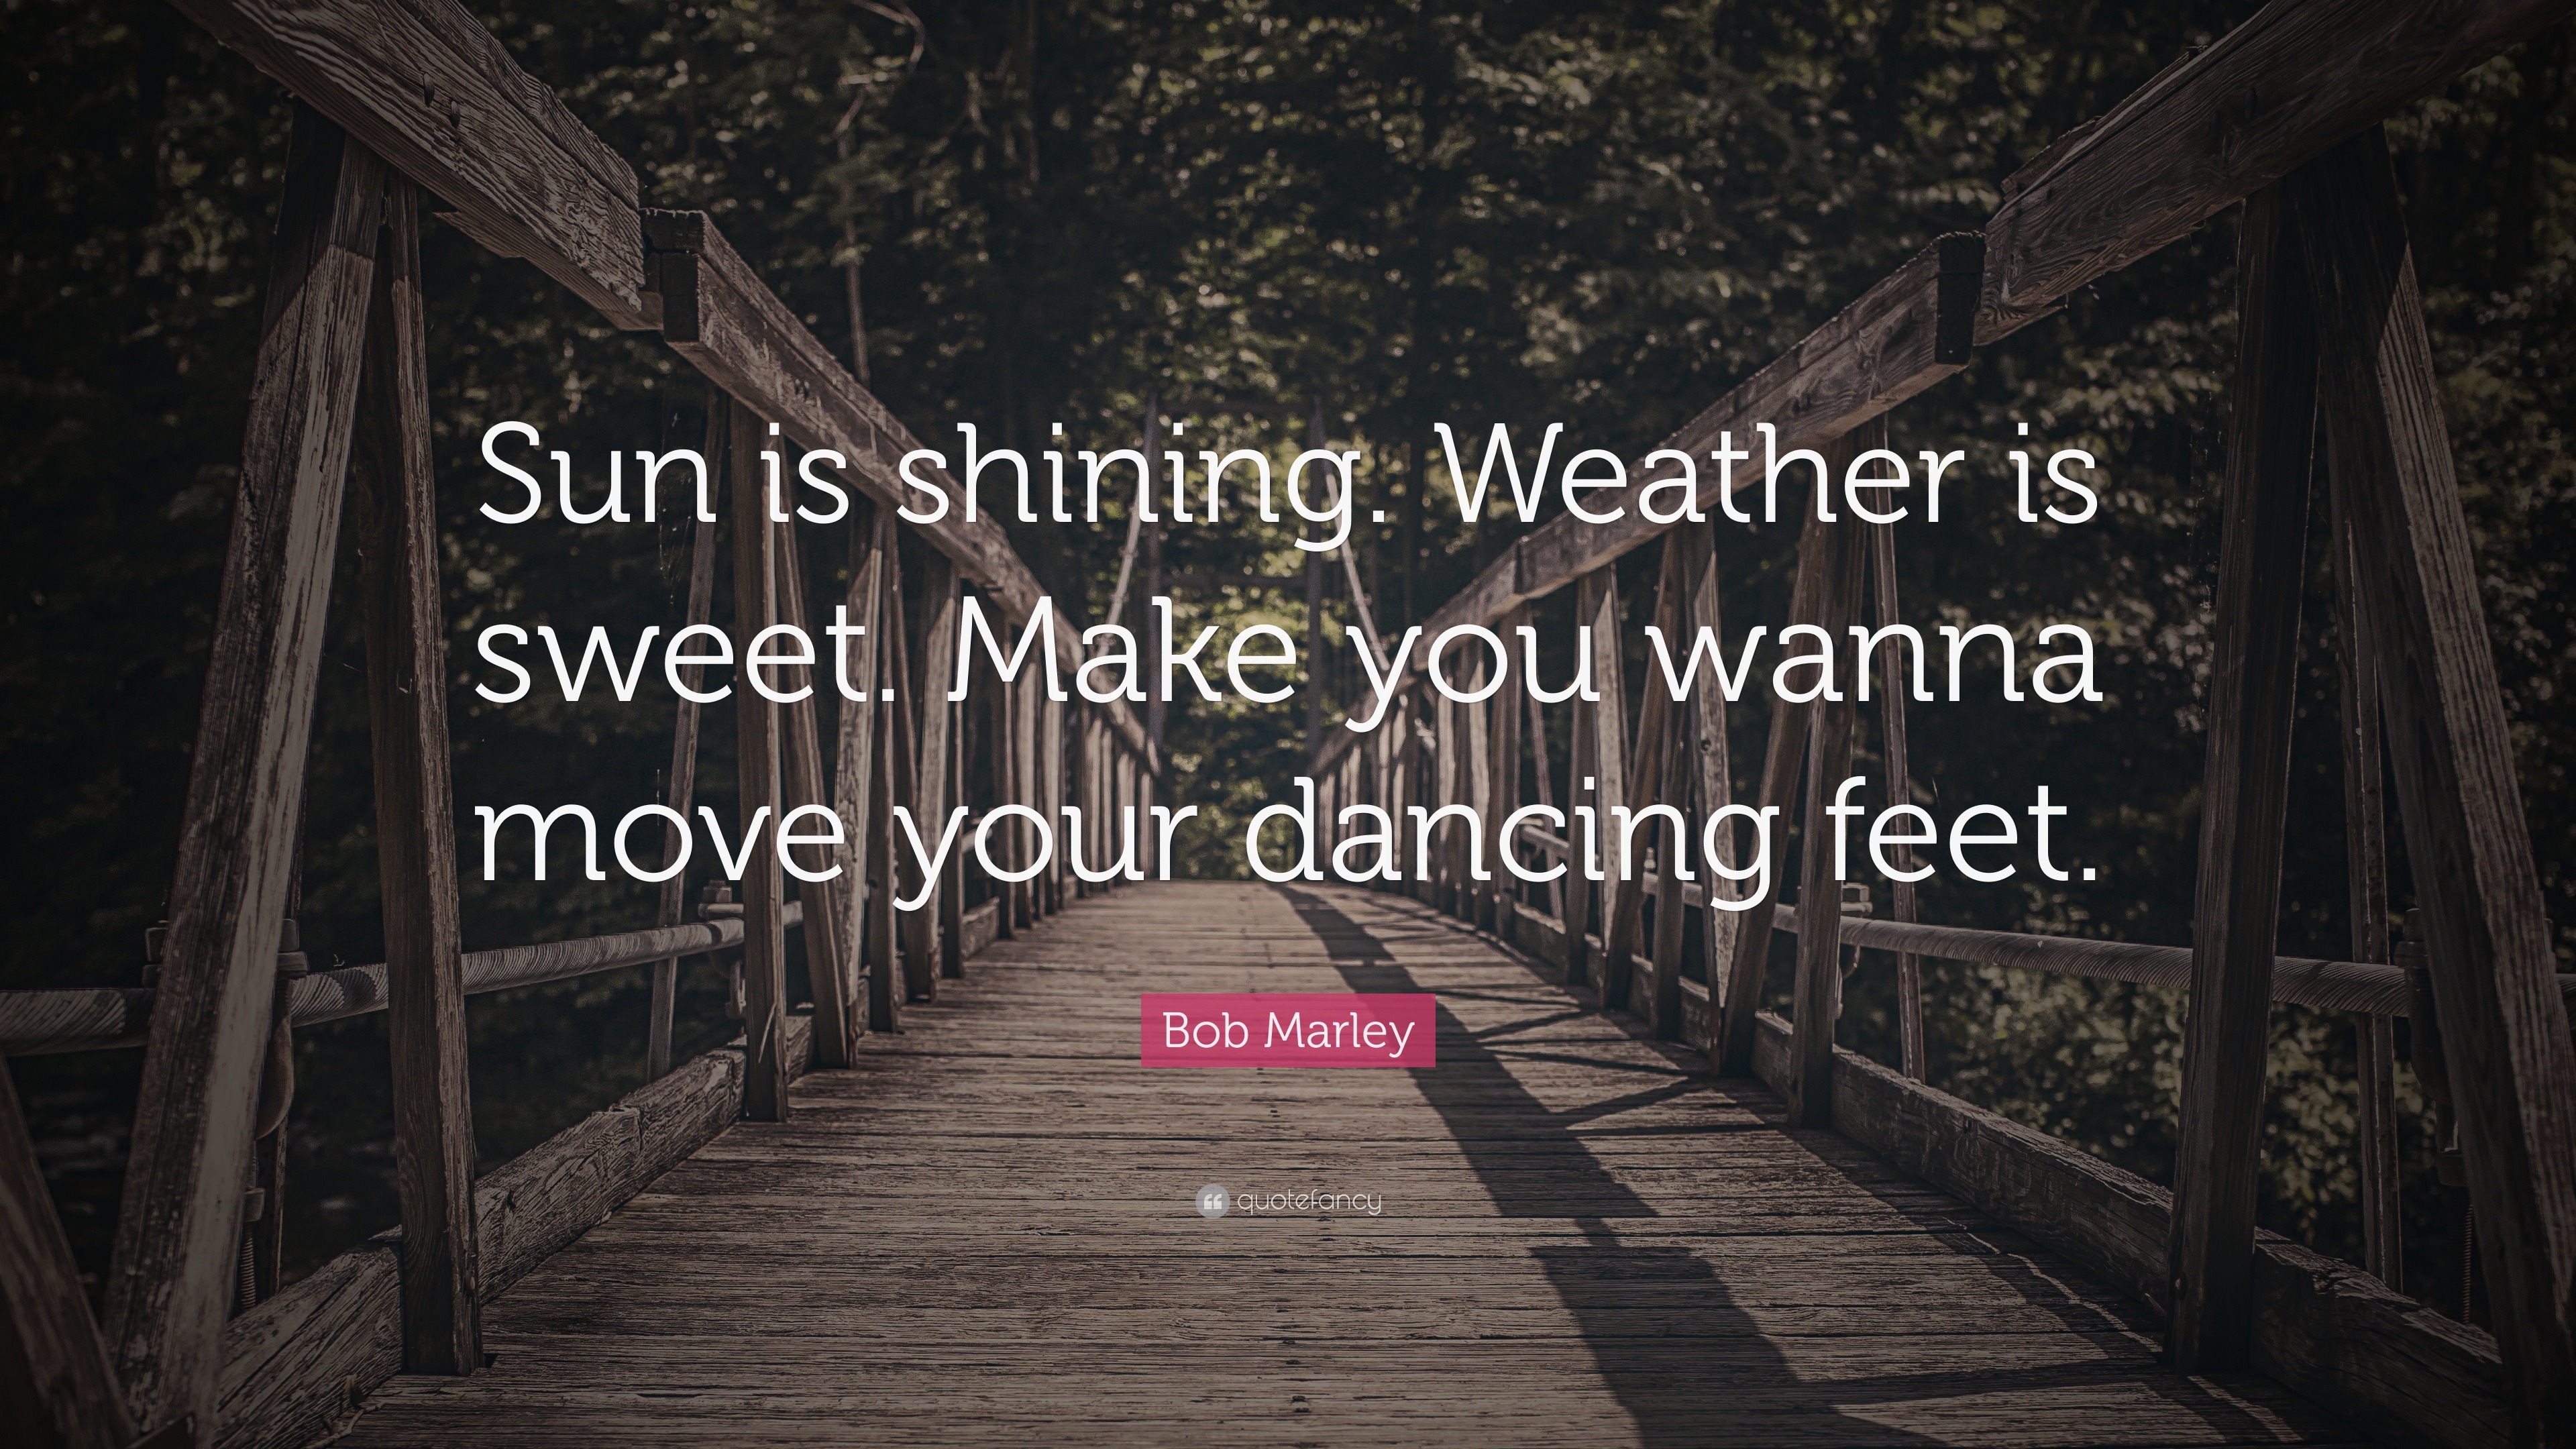 Sun Is Shining Lyrics by Bob Marley Sun is shining, the weather is sweet//  Make you want to move your dancing fee…